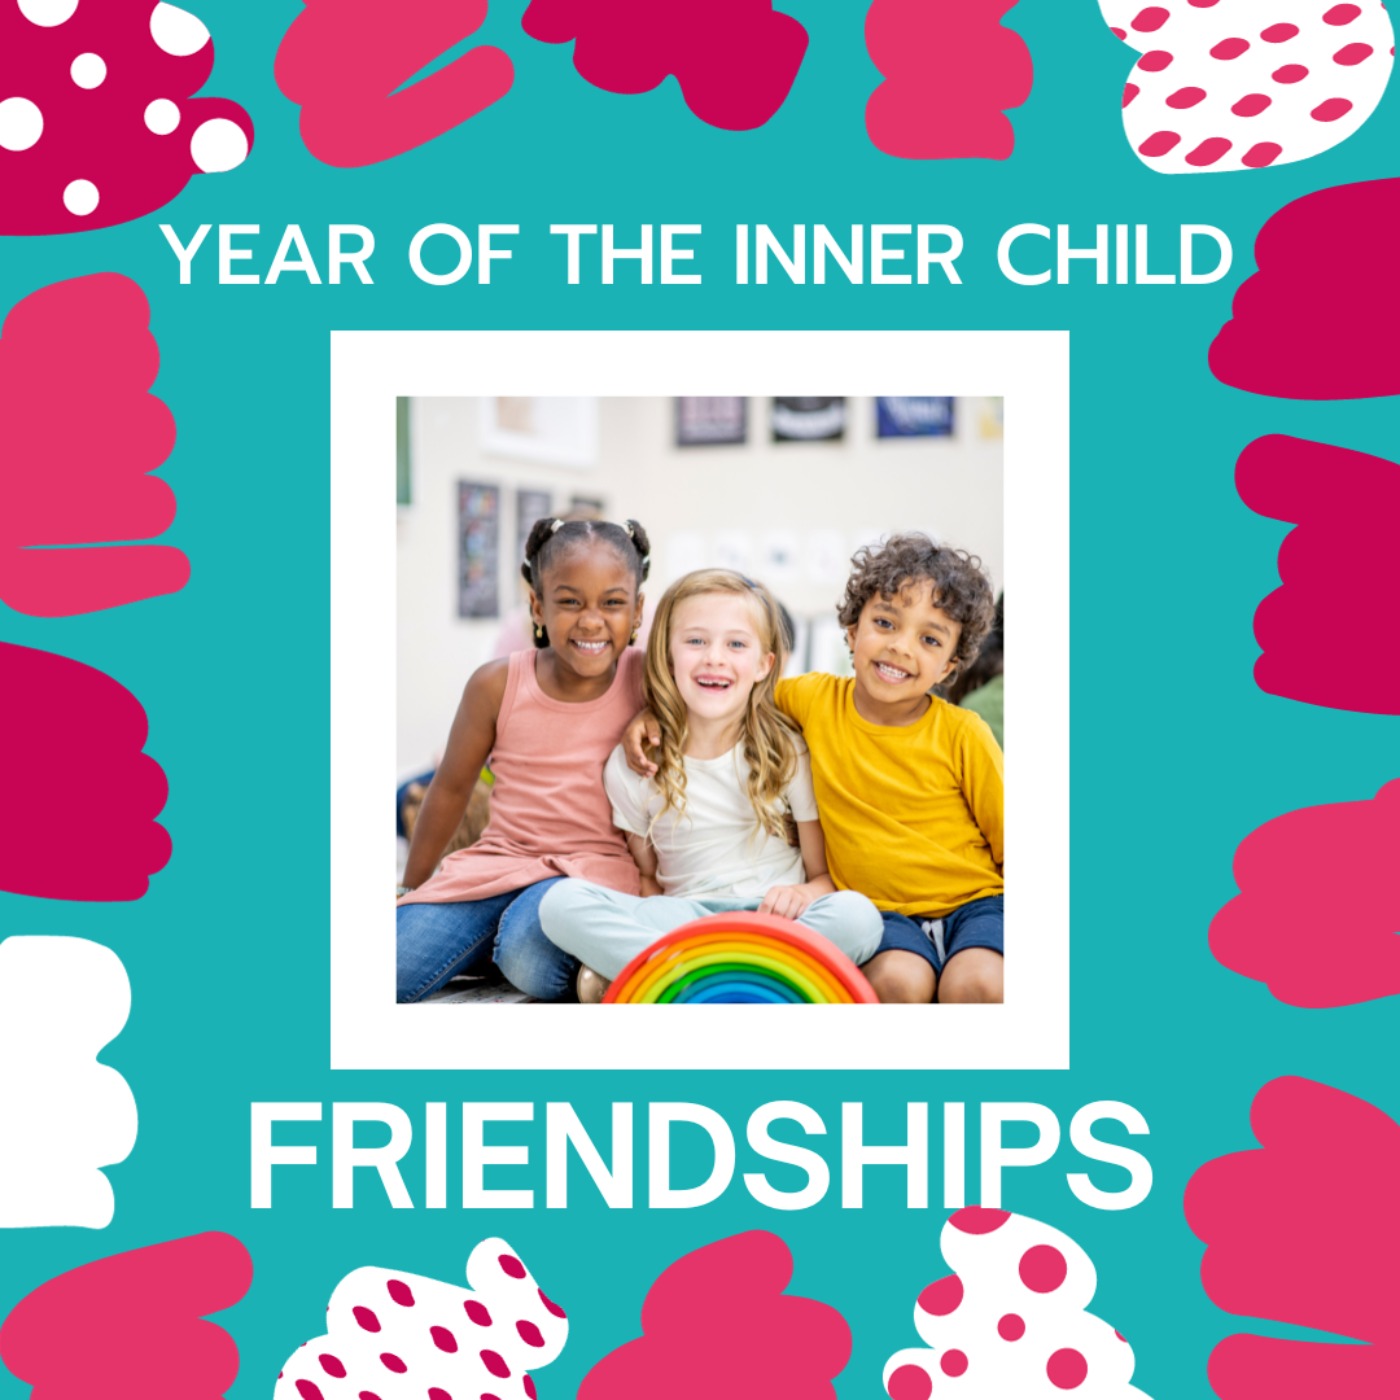 Year of the Inner Child: Friendships